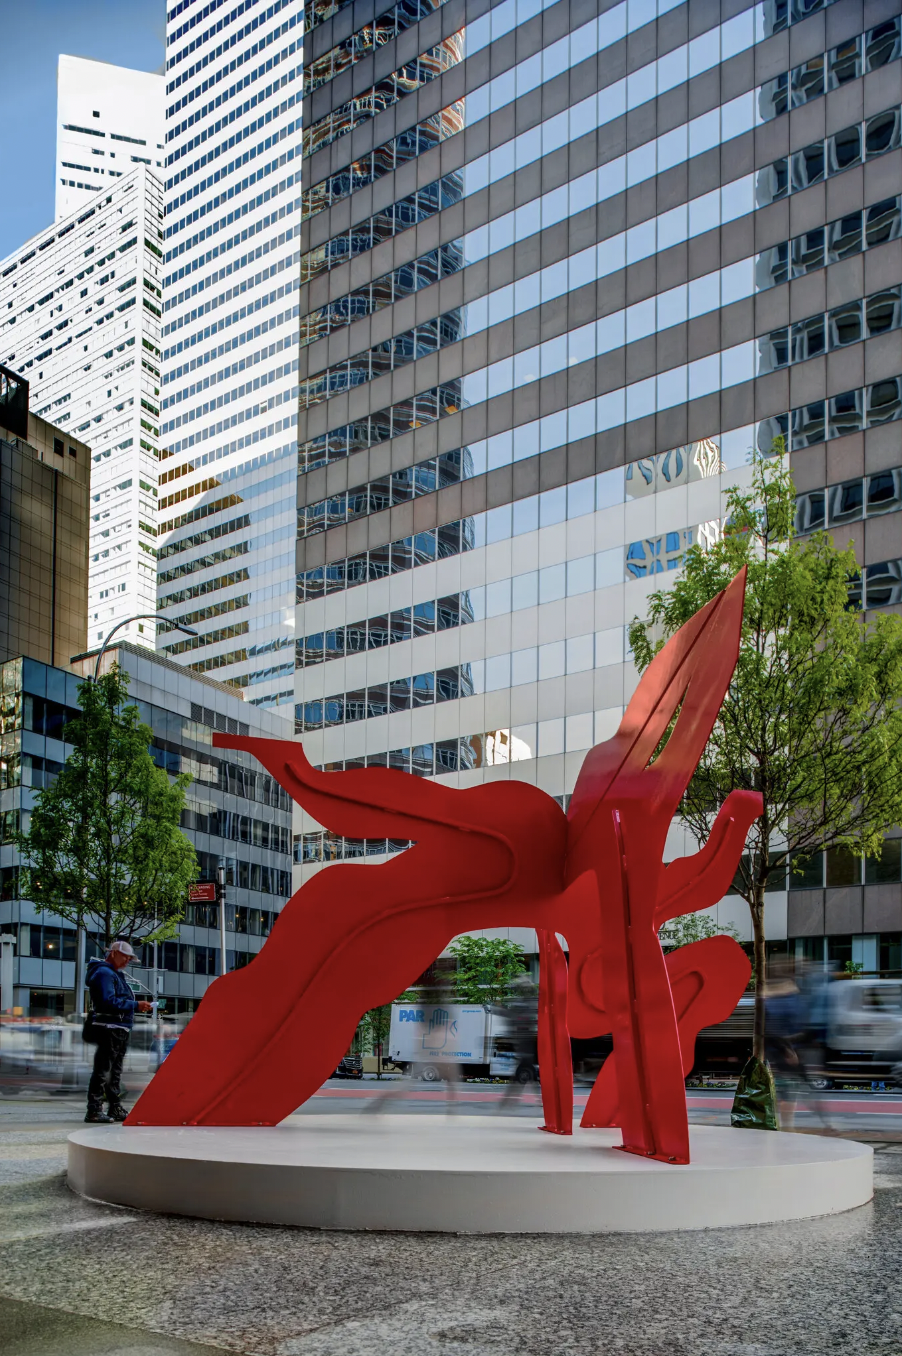 A red sculpture made of metal stands in front of glass highrises. The sculpture’s bright red stands in stark contrast to the plain, gray and black highrise in the background. The sculpture has an organix form, almost like a sea creature it tangles its arms up in the air.